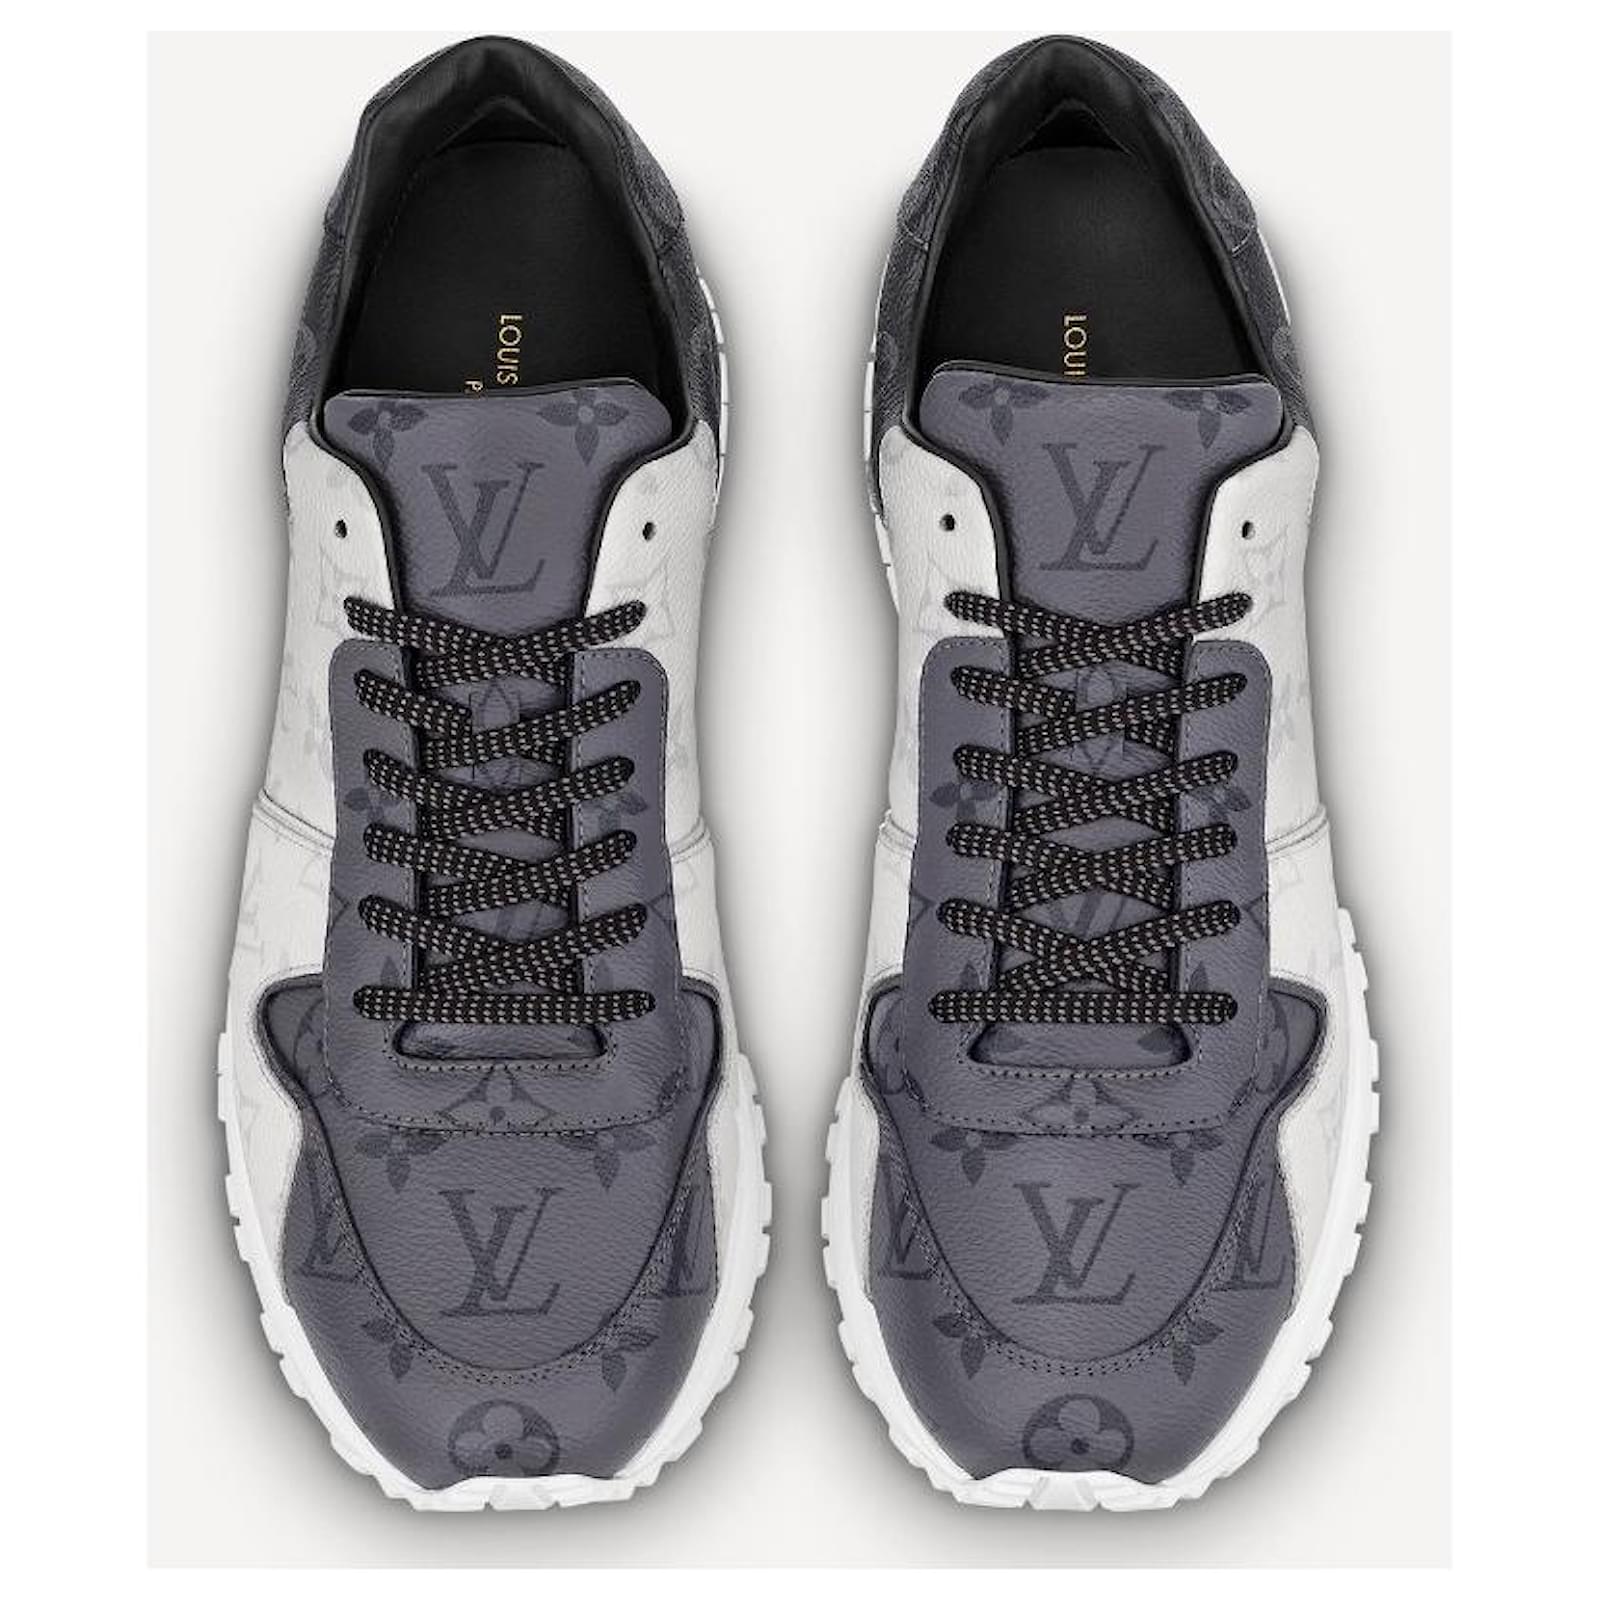 Run away leather trainers Louis Vuitton Grey size 36.5 EU in Leather -  27052926